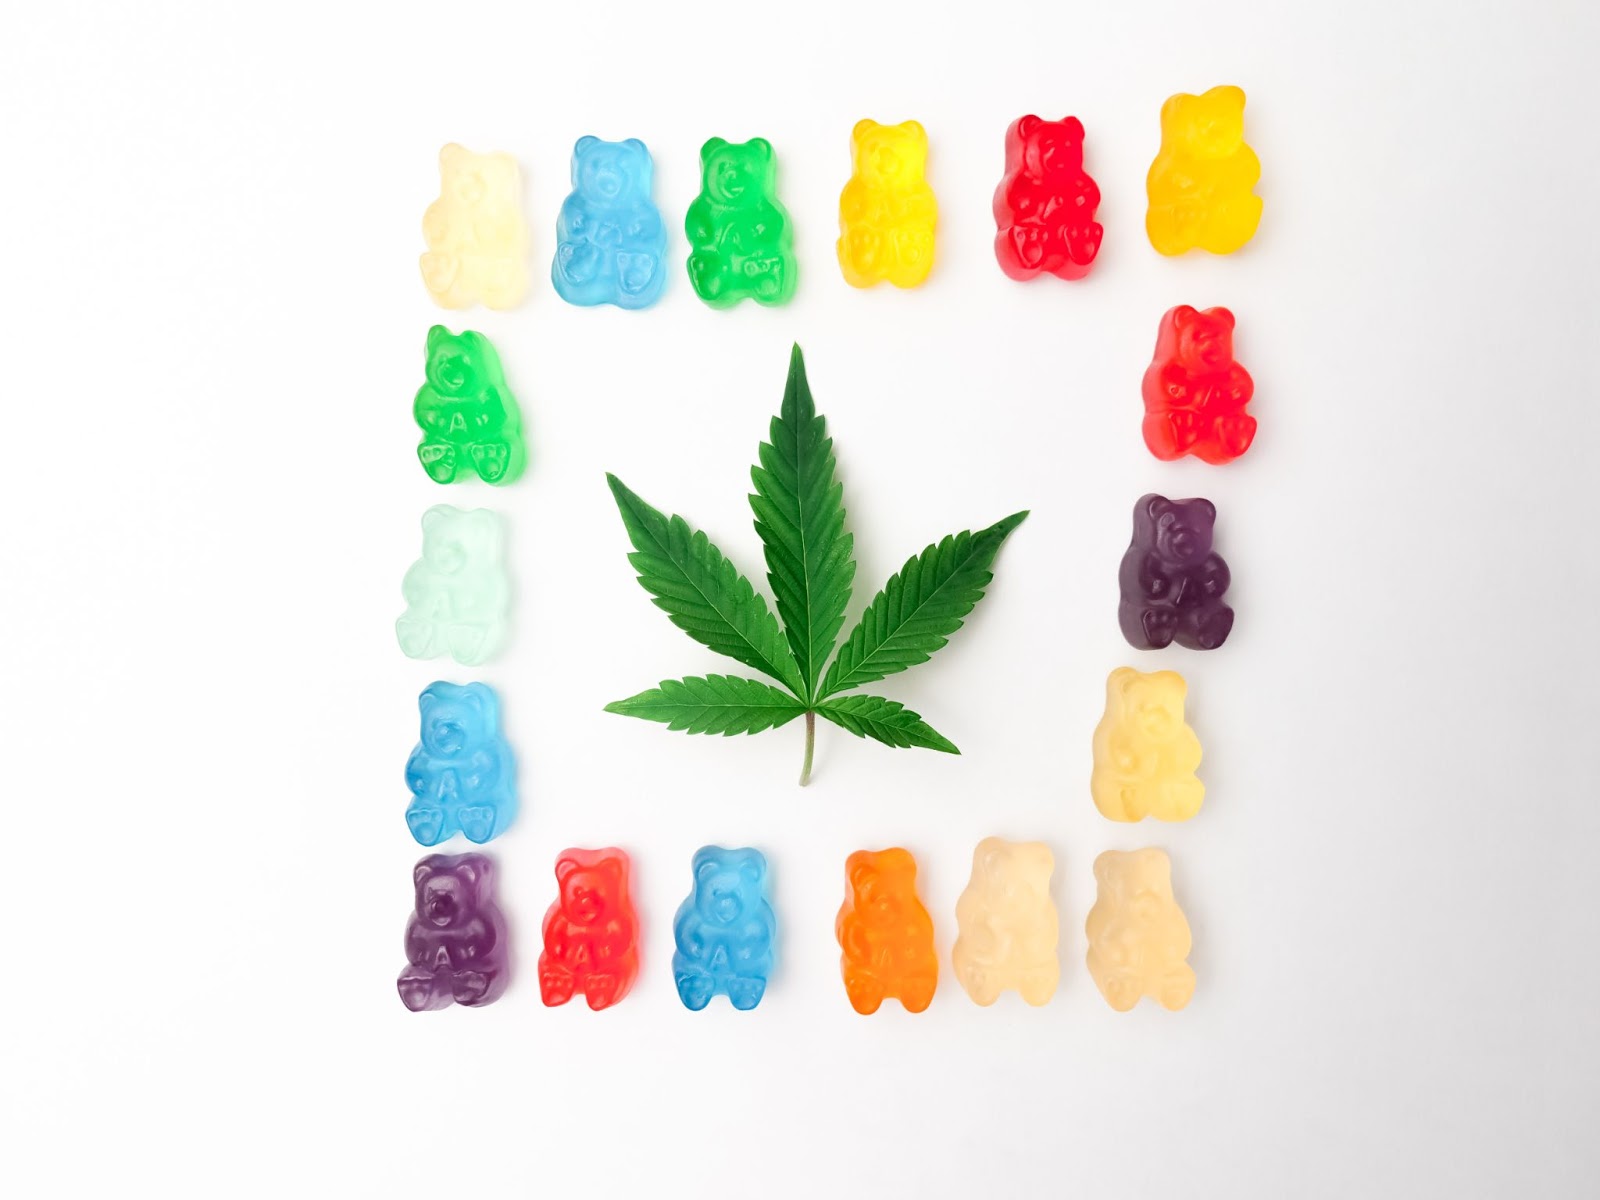 A green hemp leaf surrounded by colorful gummy bears